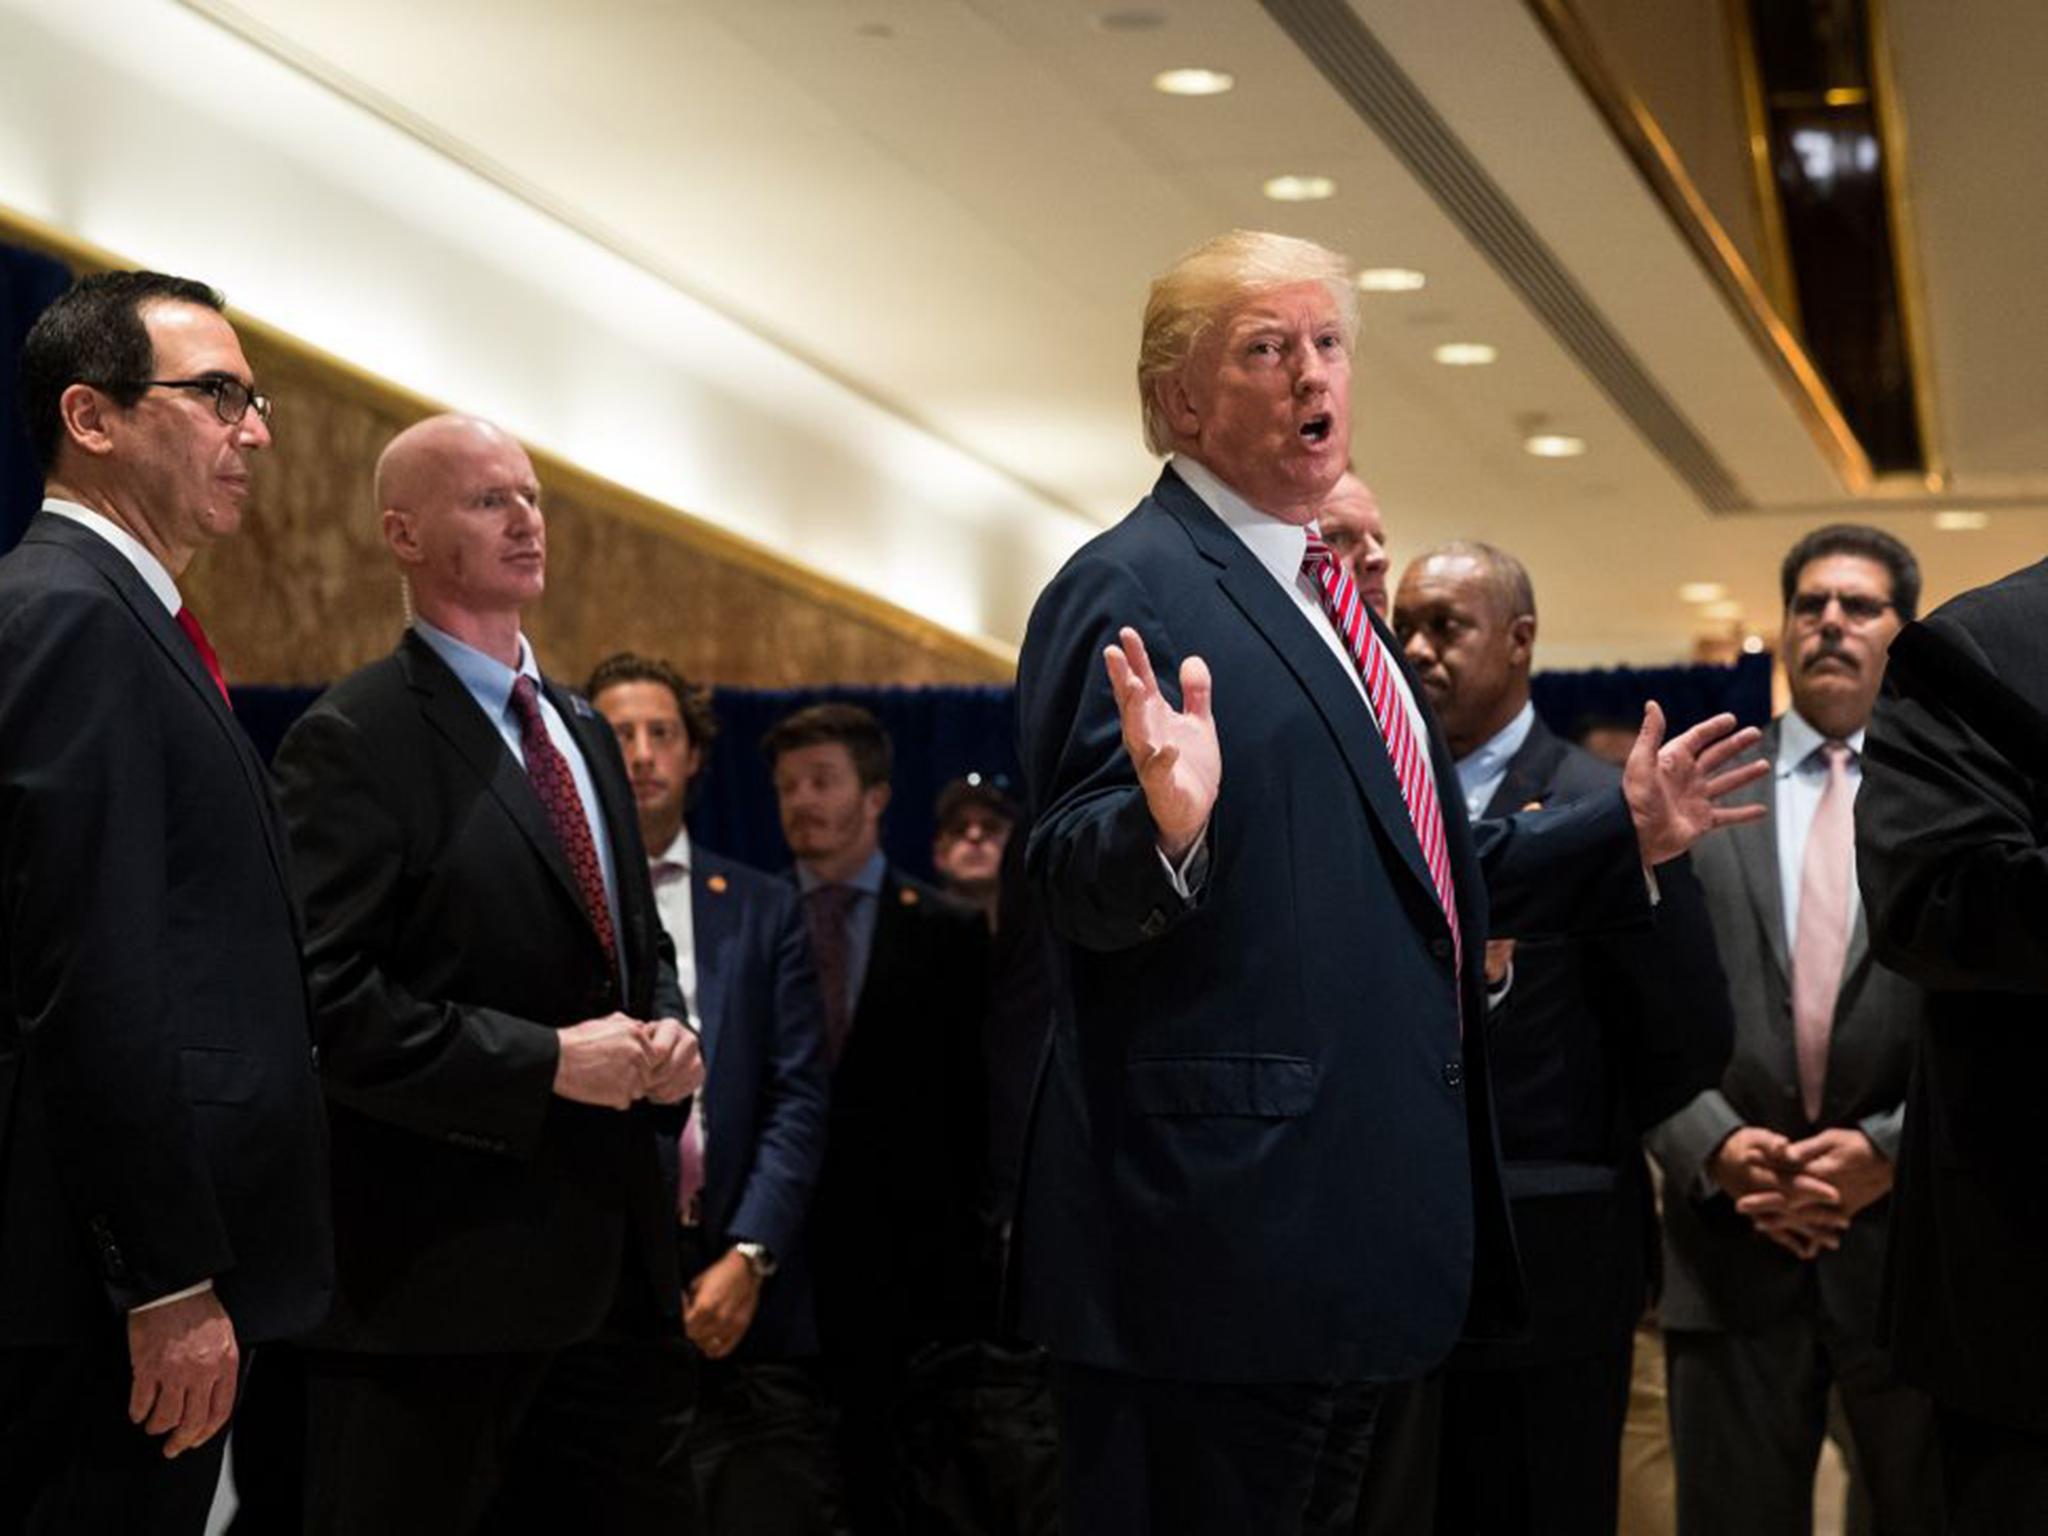 US President Donald Trump speaks to reporters on his way out of the lobby following a meeting on infrastructure at Trump Tower